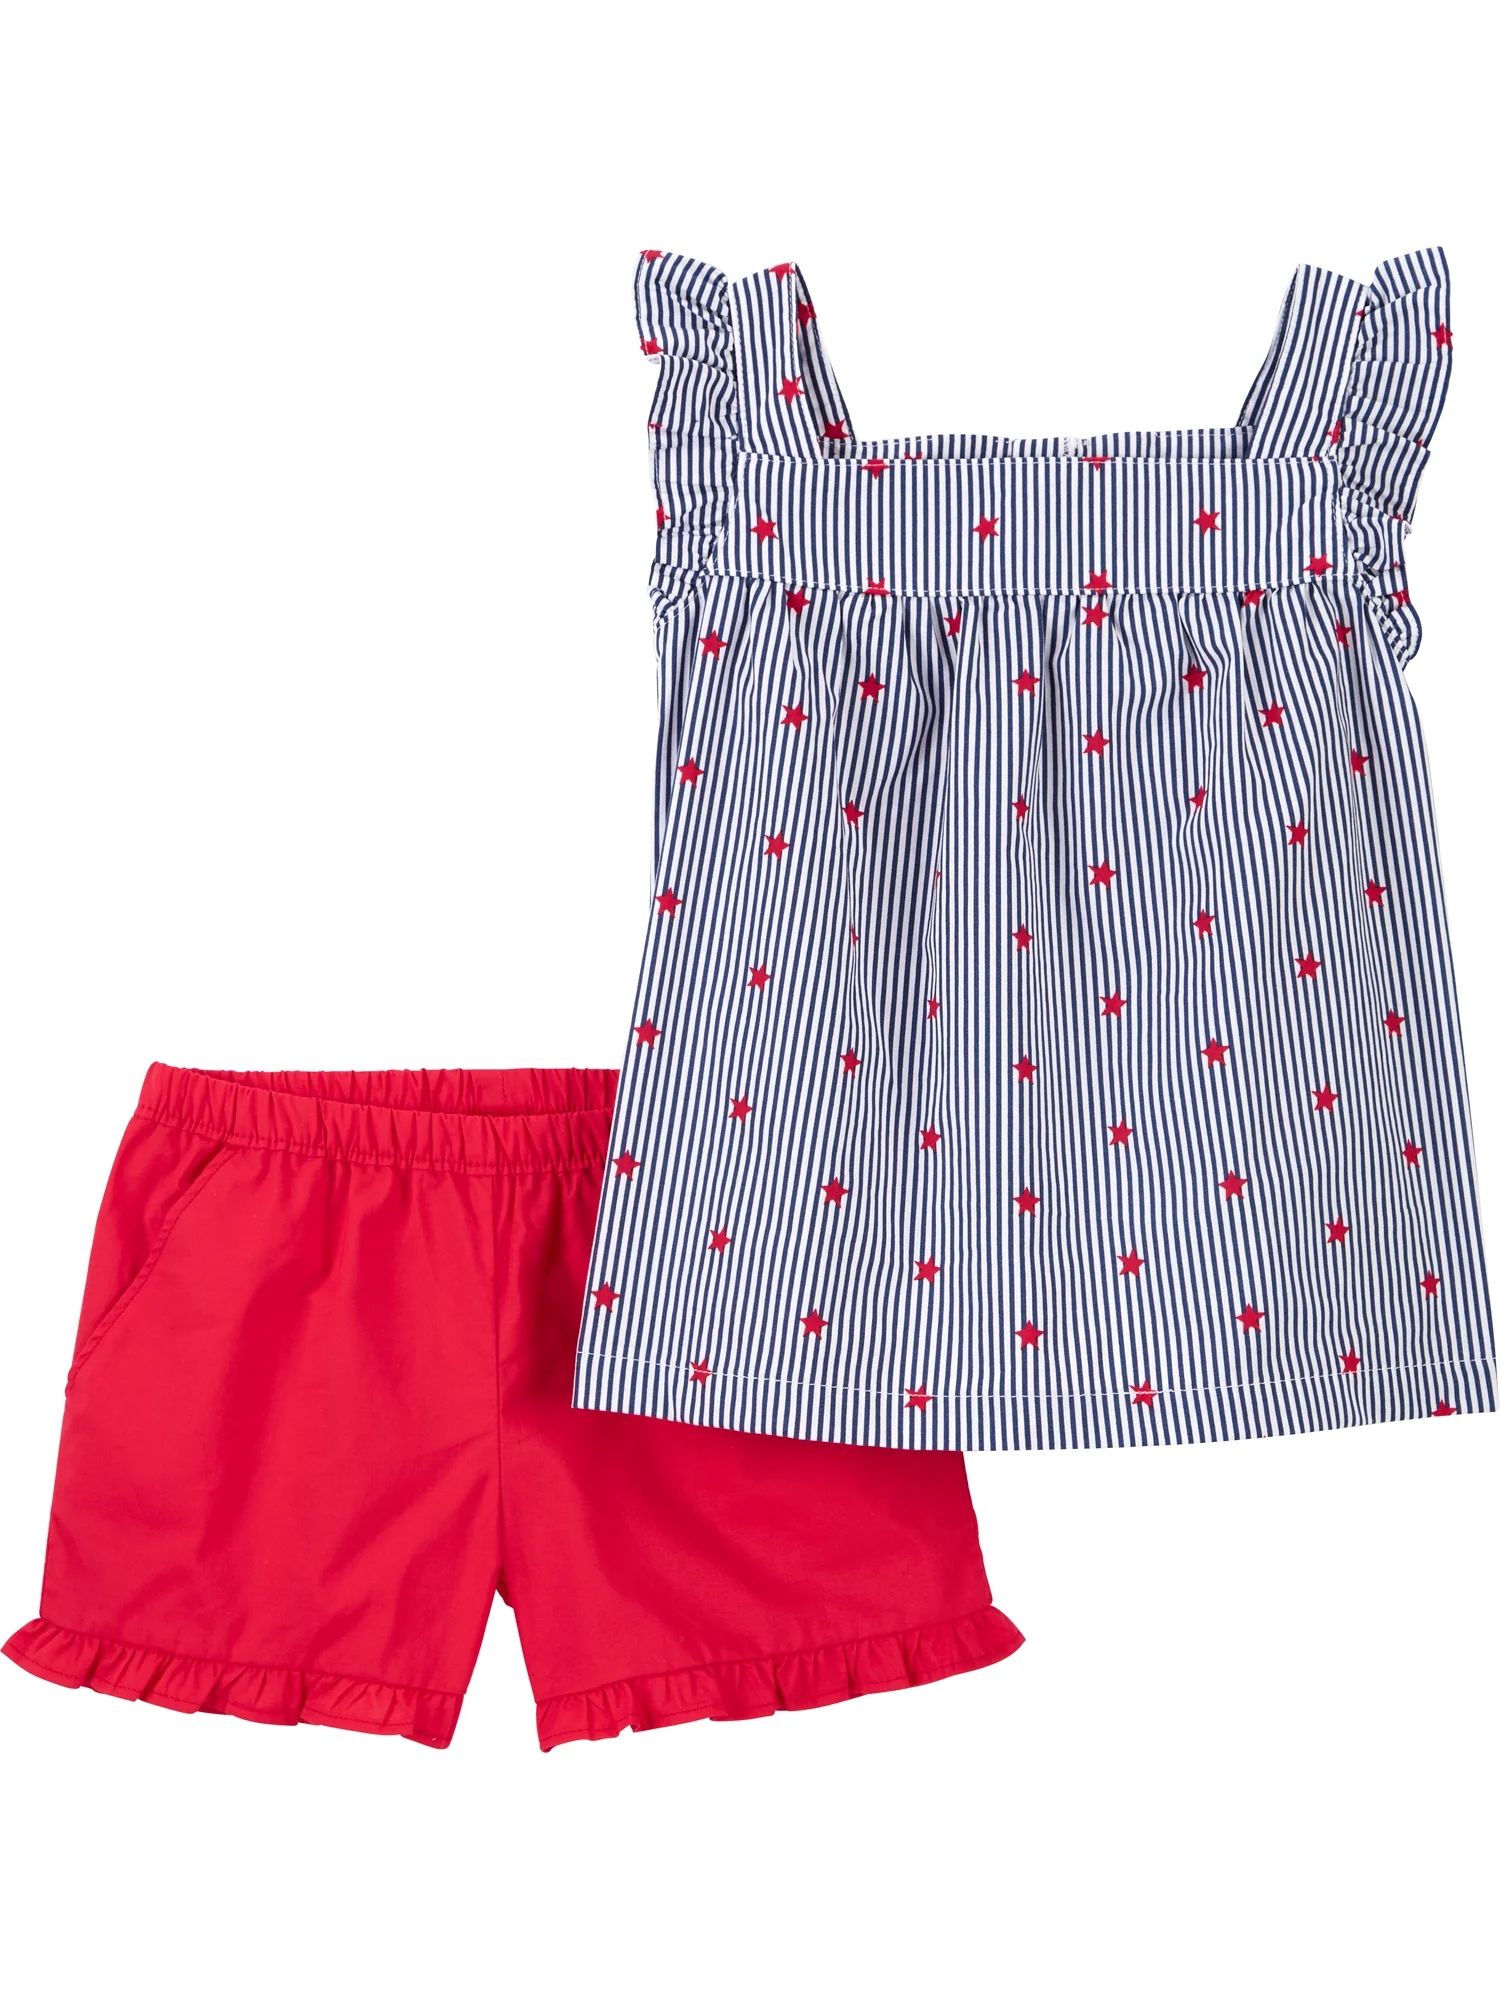 Carter's Child of Mine Toddler Girl, Patriotic Outfit Short Set, Sizes 12M- 5T | Walmart (US)